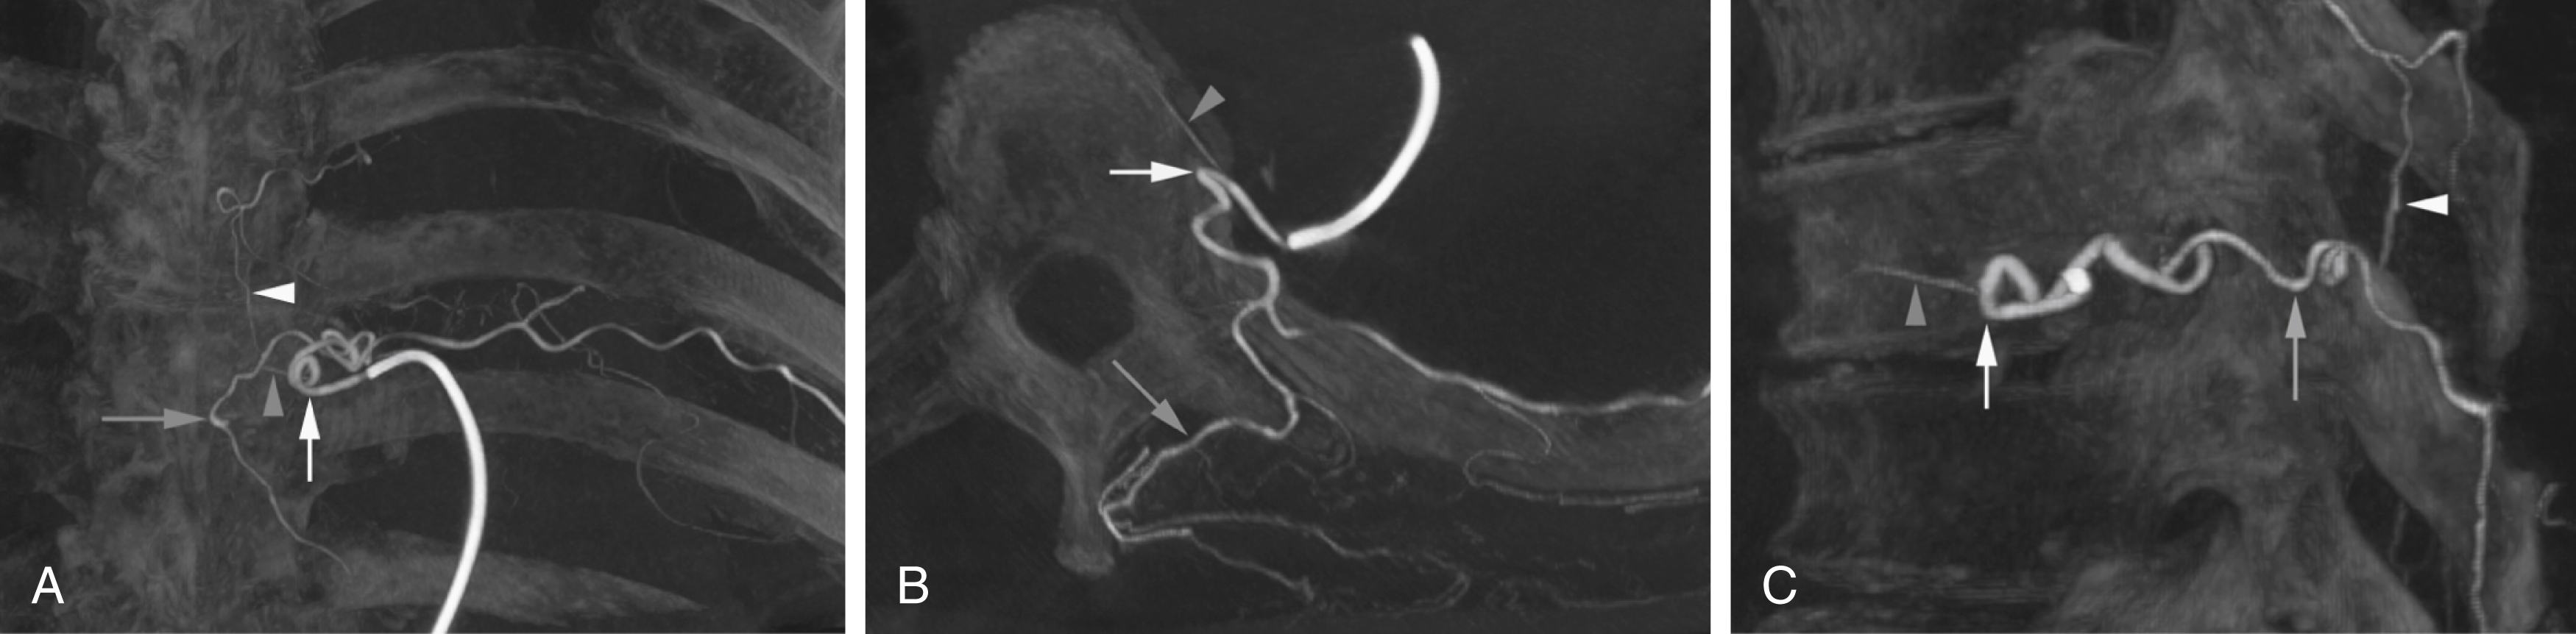 Fig. 57.3, Flat-panel catheter angiotomography of left T6 showing thoracic internal segmental artery (ISA) anatomy. Typical anatomy of left thoracic ISA in coronal (A), sagittal (B), and axial (C) planes. Two-dimensional nature of angiography results in superposition of many branches that can at times be difficult to distinguish (e.g., prominent dorsal muscular branch [ white arrowhead ] may adopt course reminiscent of spinal contributor). Because of leftward position of thoracic aorta, ISAs are longer on right side than on left, in particular at upper thoracic levels, where left ISAs adopt an initial recurrent course before curving sharply backward to pass behind mediastinal attachment of endothoracic fascia ( white arrow ). Recurrent osseous branch is stretched over lateral aspect of vertebral body ( gray arrowhead ). Gray arrow points at dorsal branch of ISA (or dorsal component of dorsispinal artery) as it divides into its terminal musculocutaneous branches.